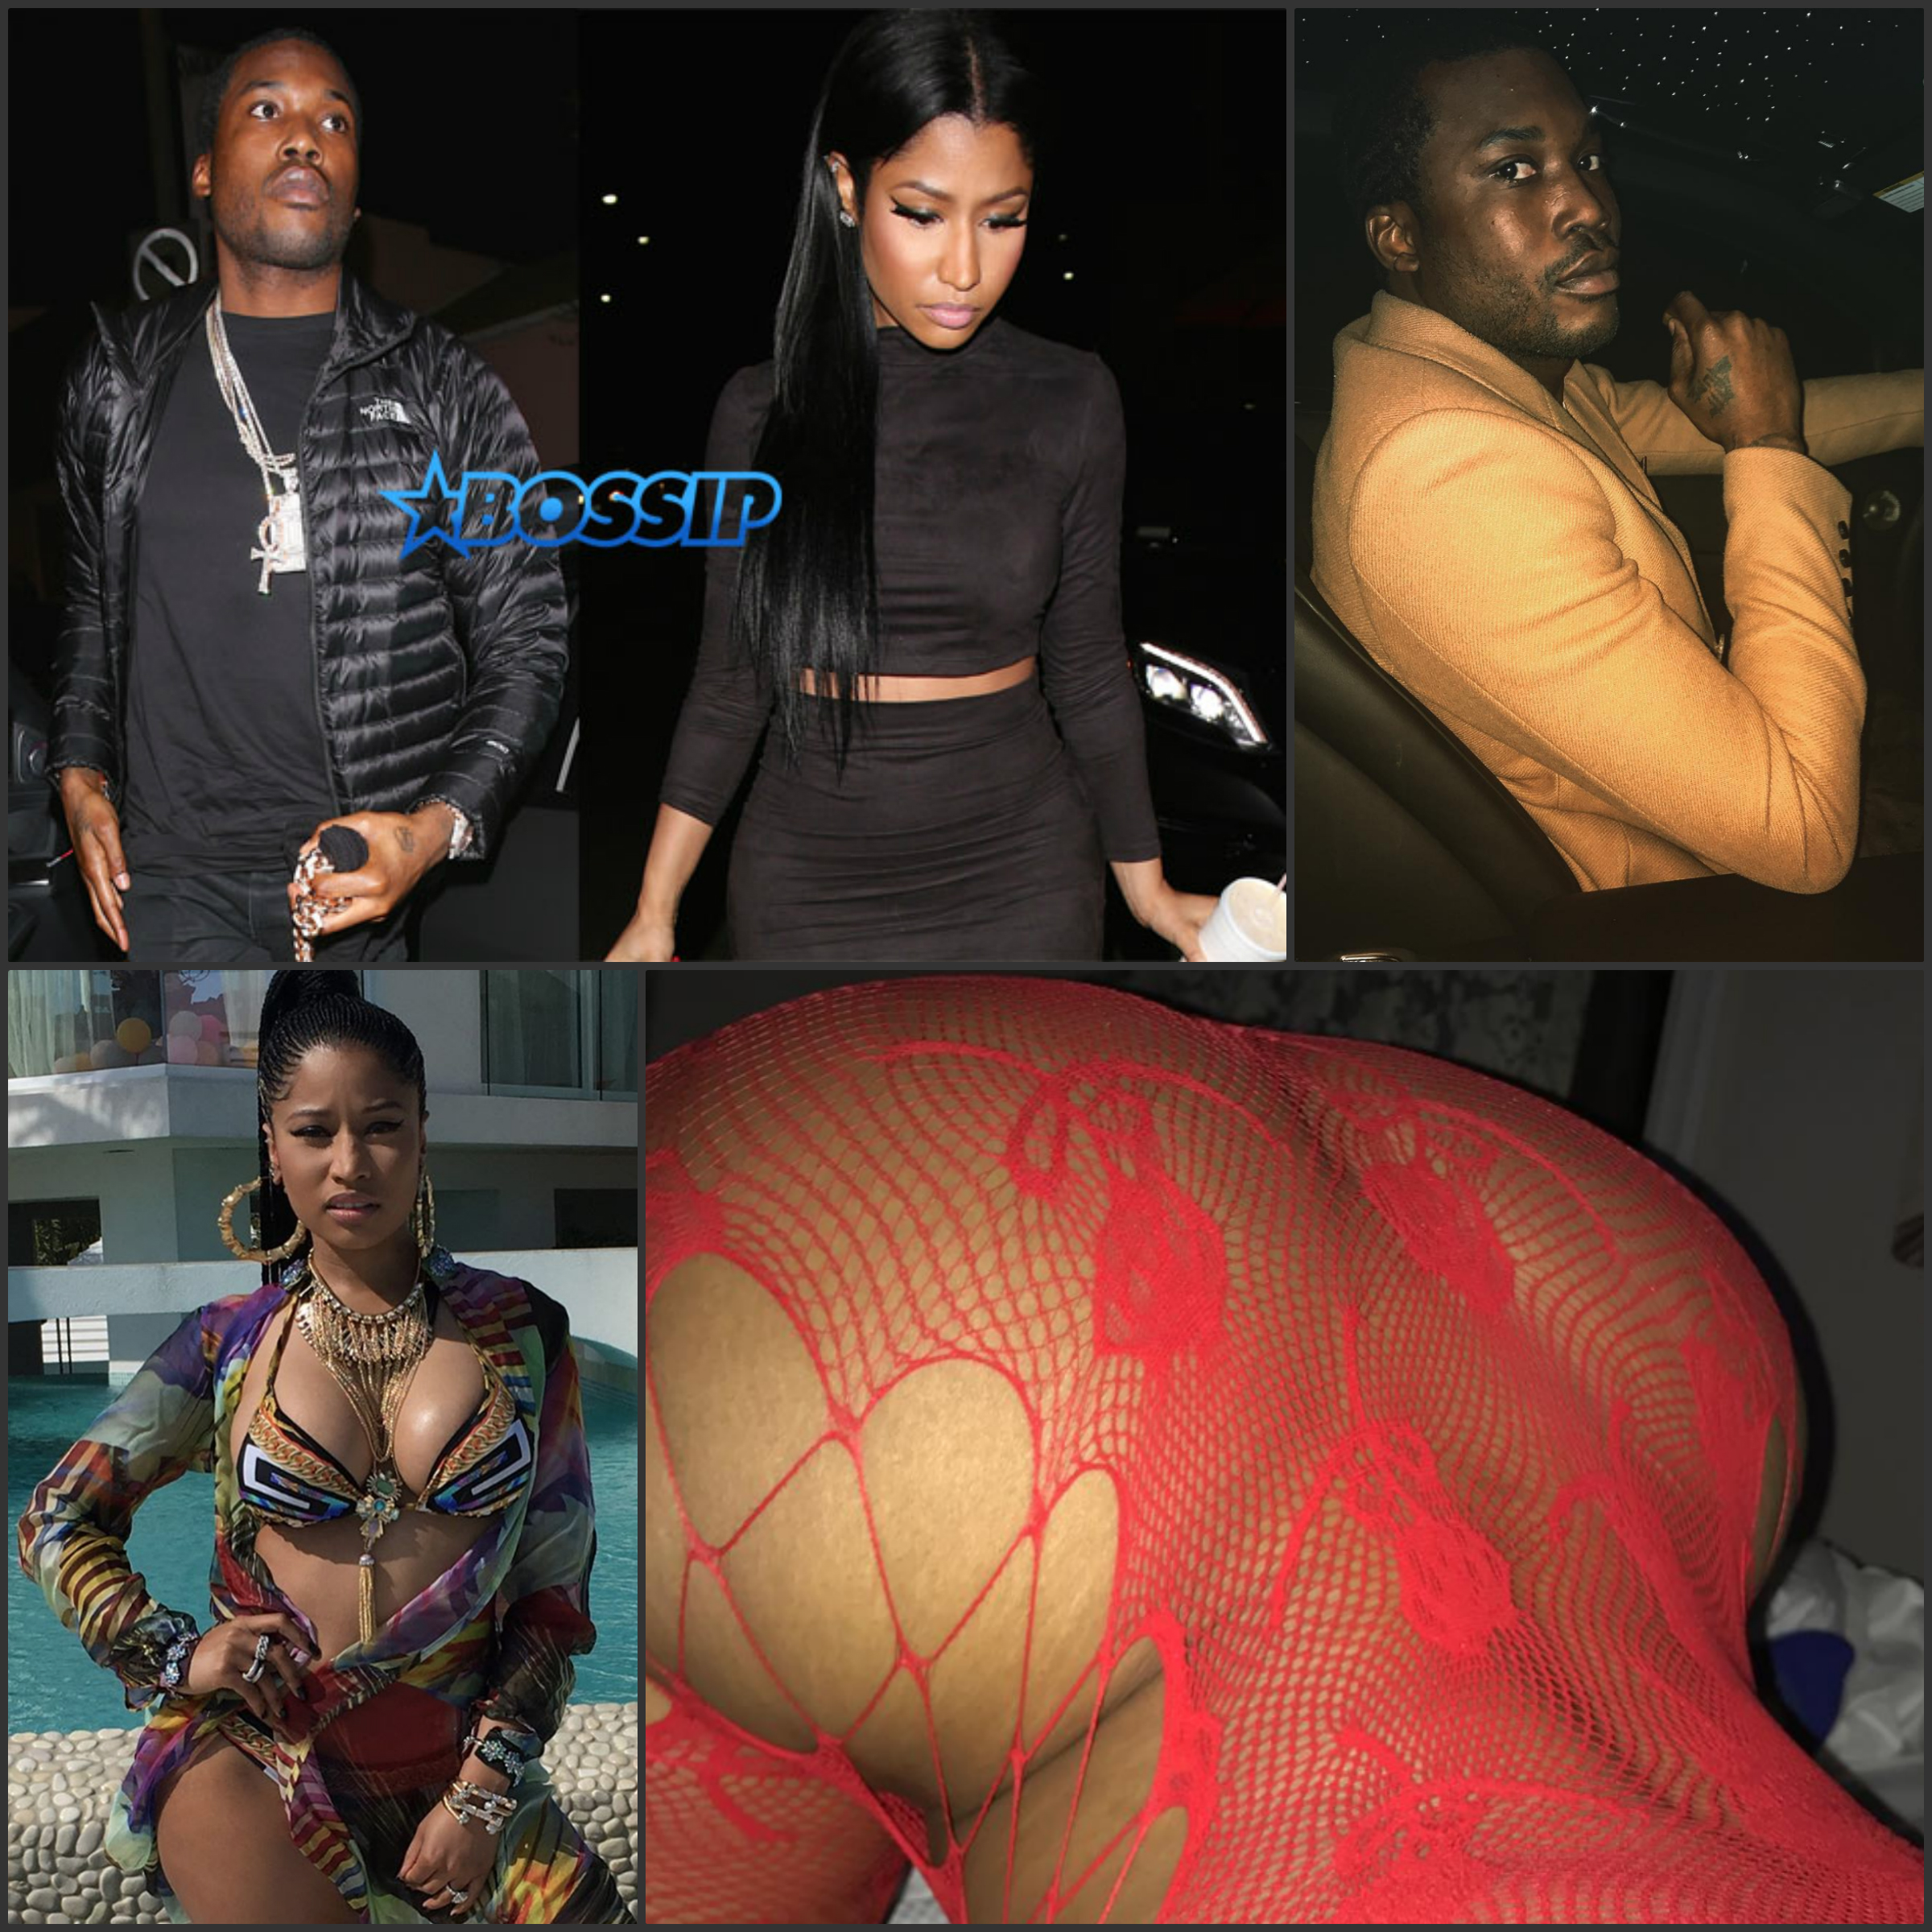 chantal couture recommends nicki minaj booty photos pic